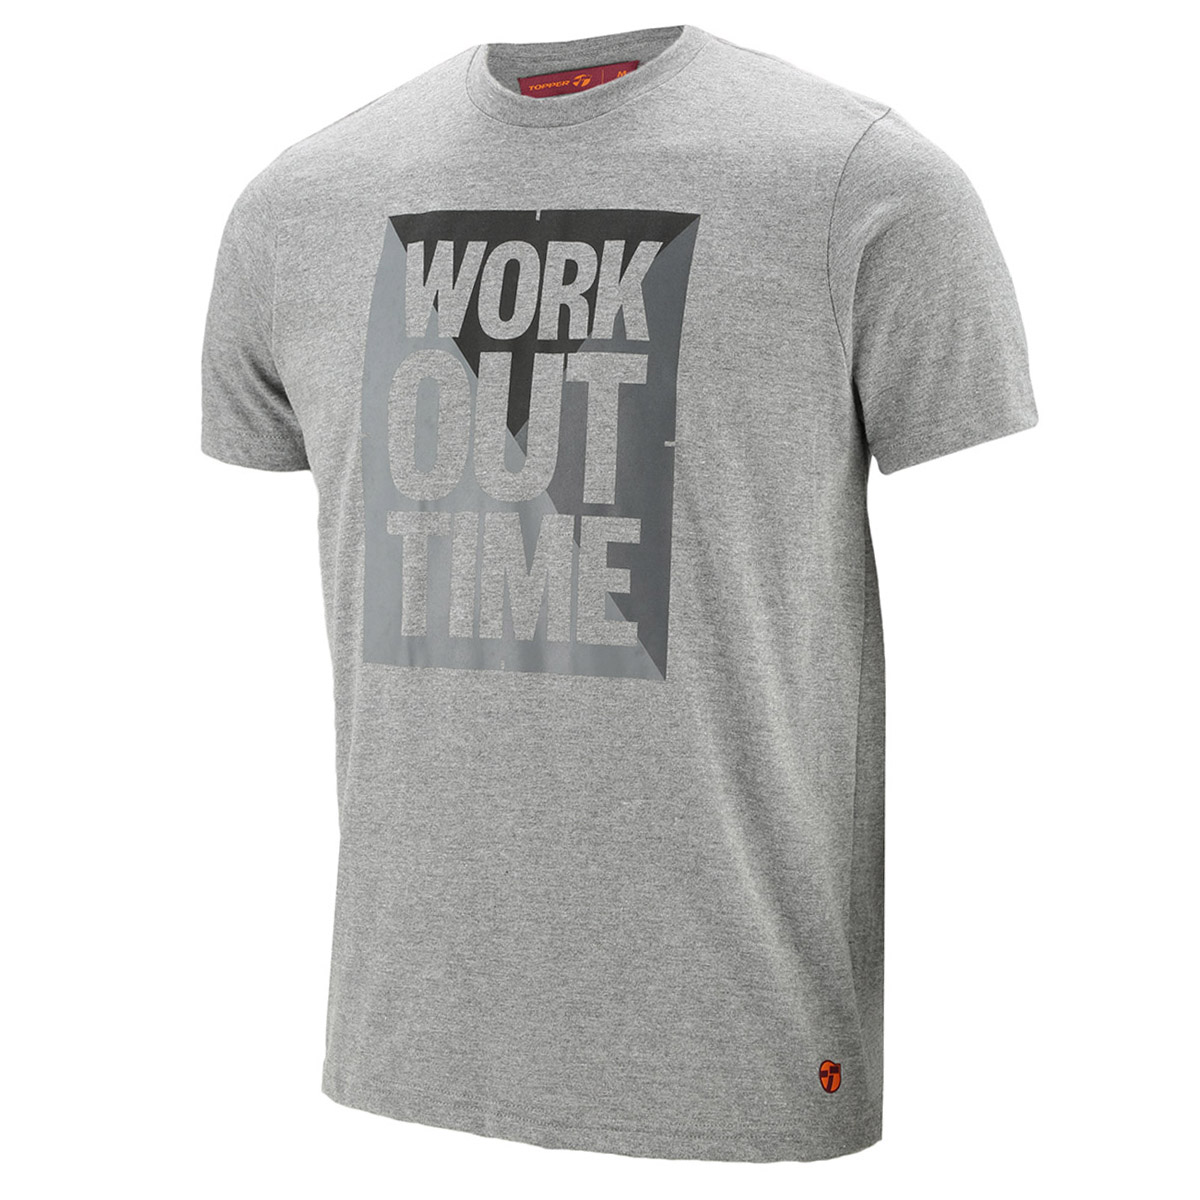 Remera Topper GTM MC Workout Time,  image number null